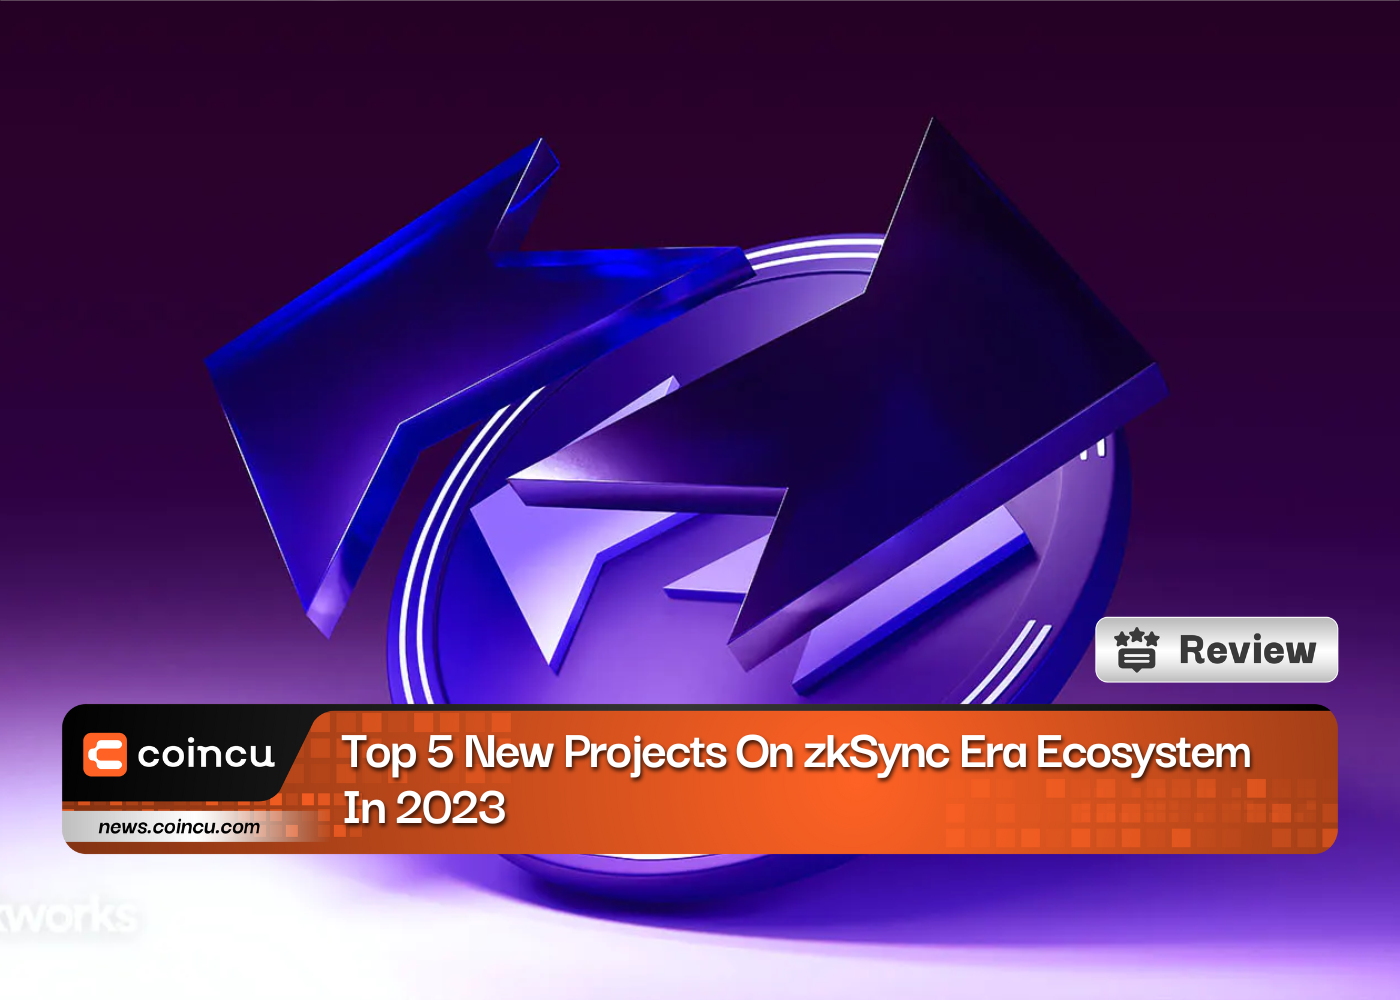 Top 5 New Projects On zkSync Era Ecosystem In 2023